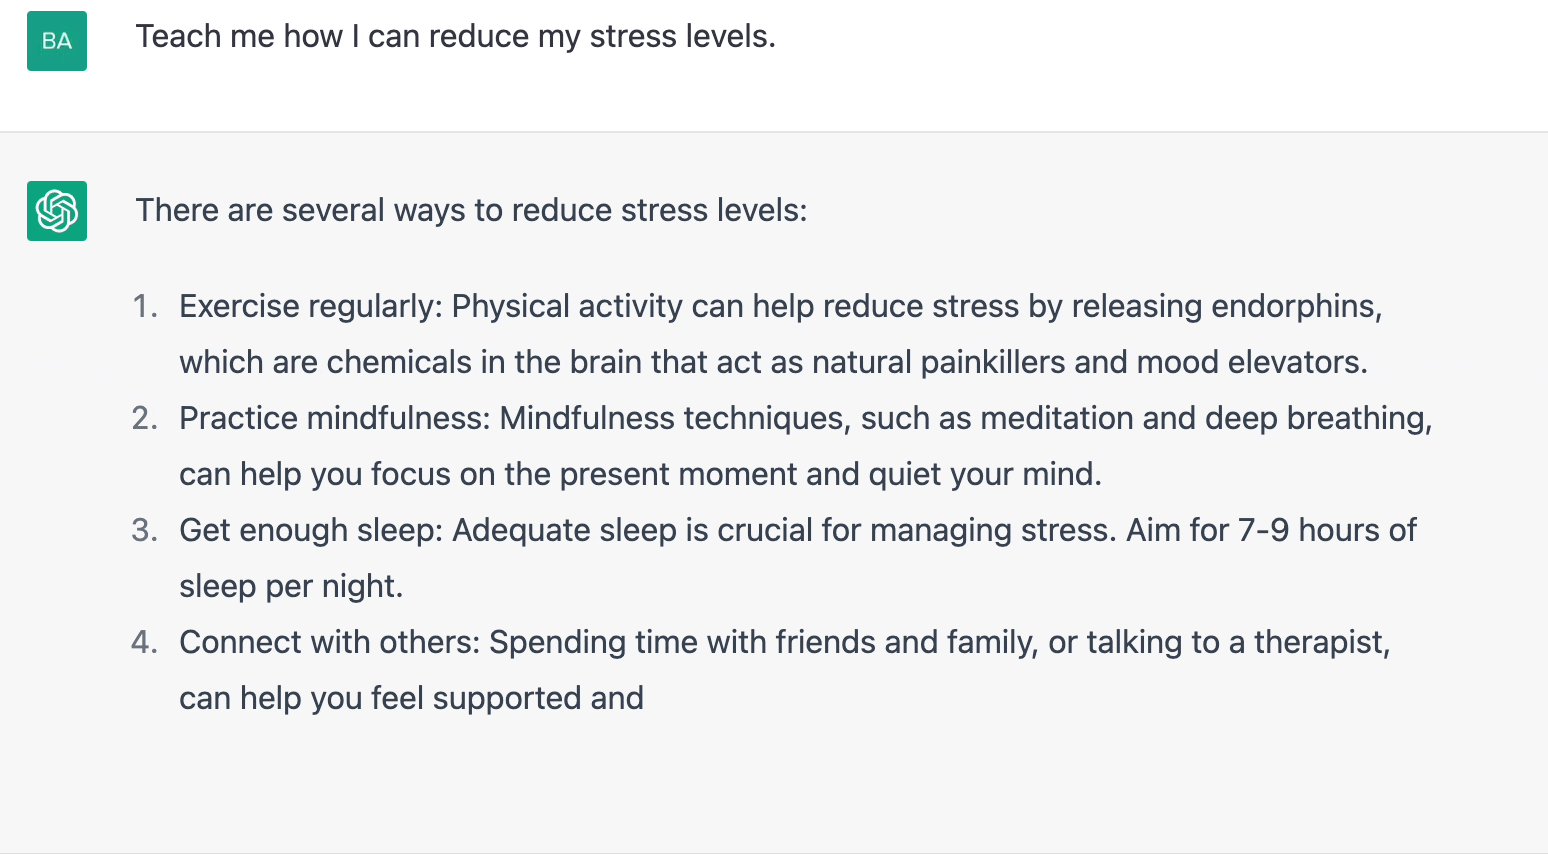 ChatGPT prompt about teaching how to reduce stress levels